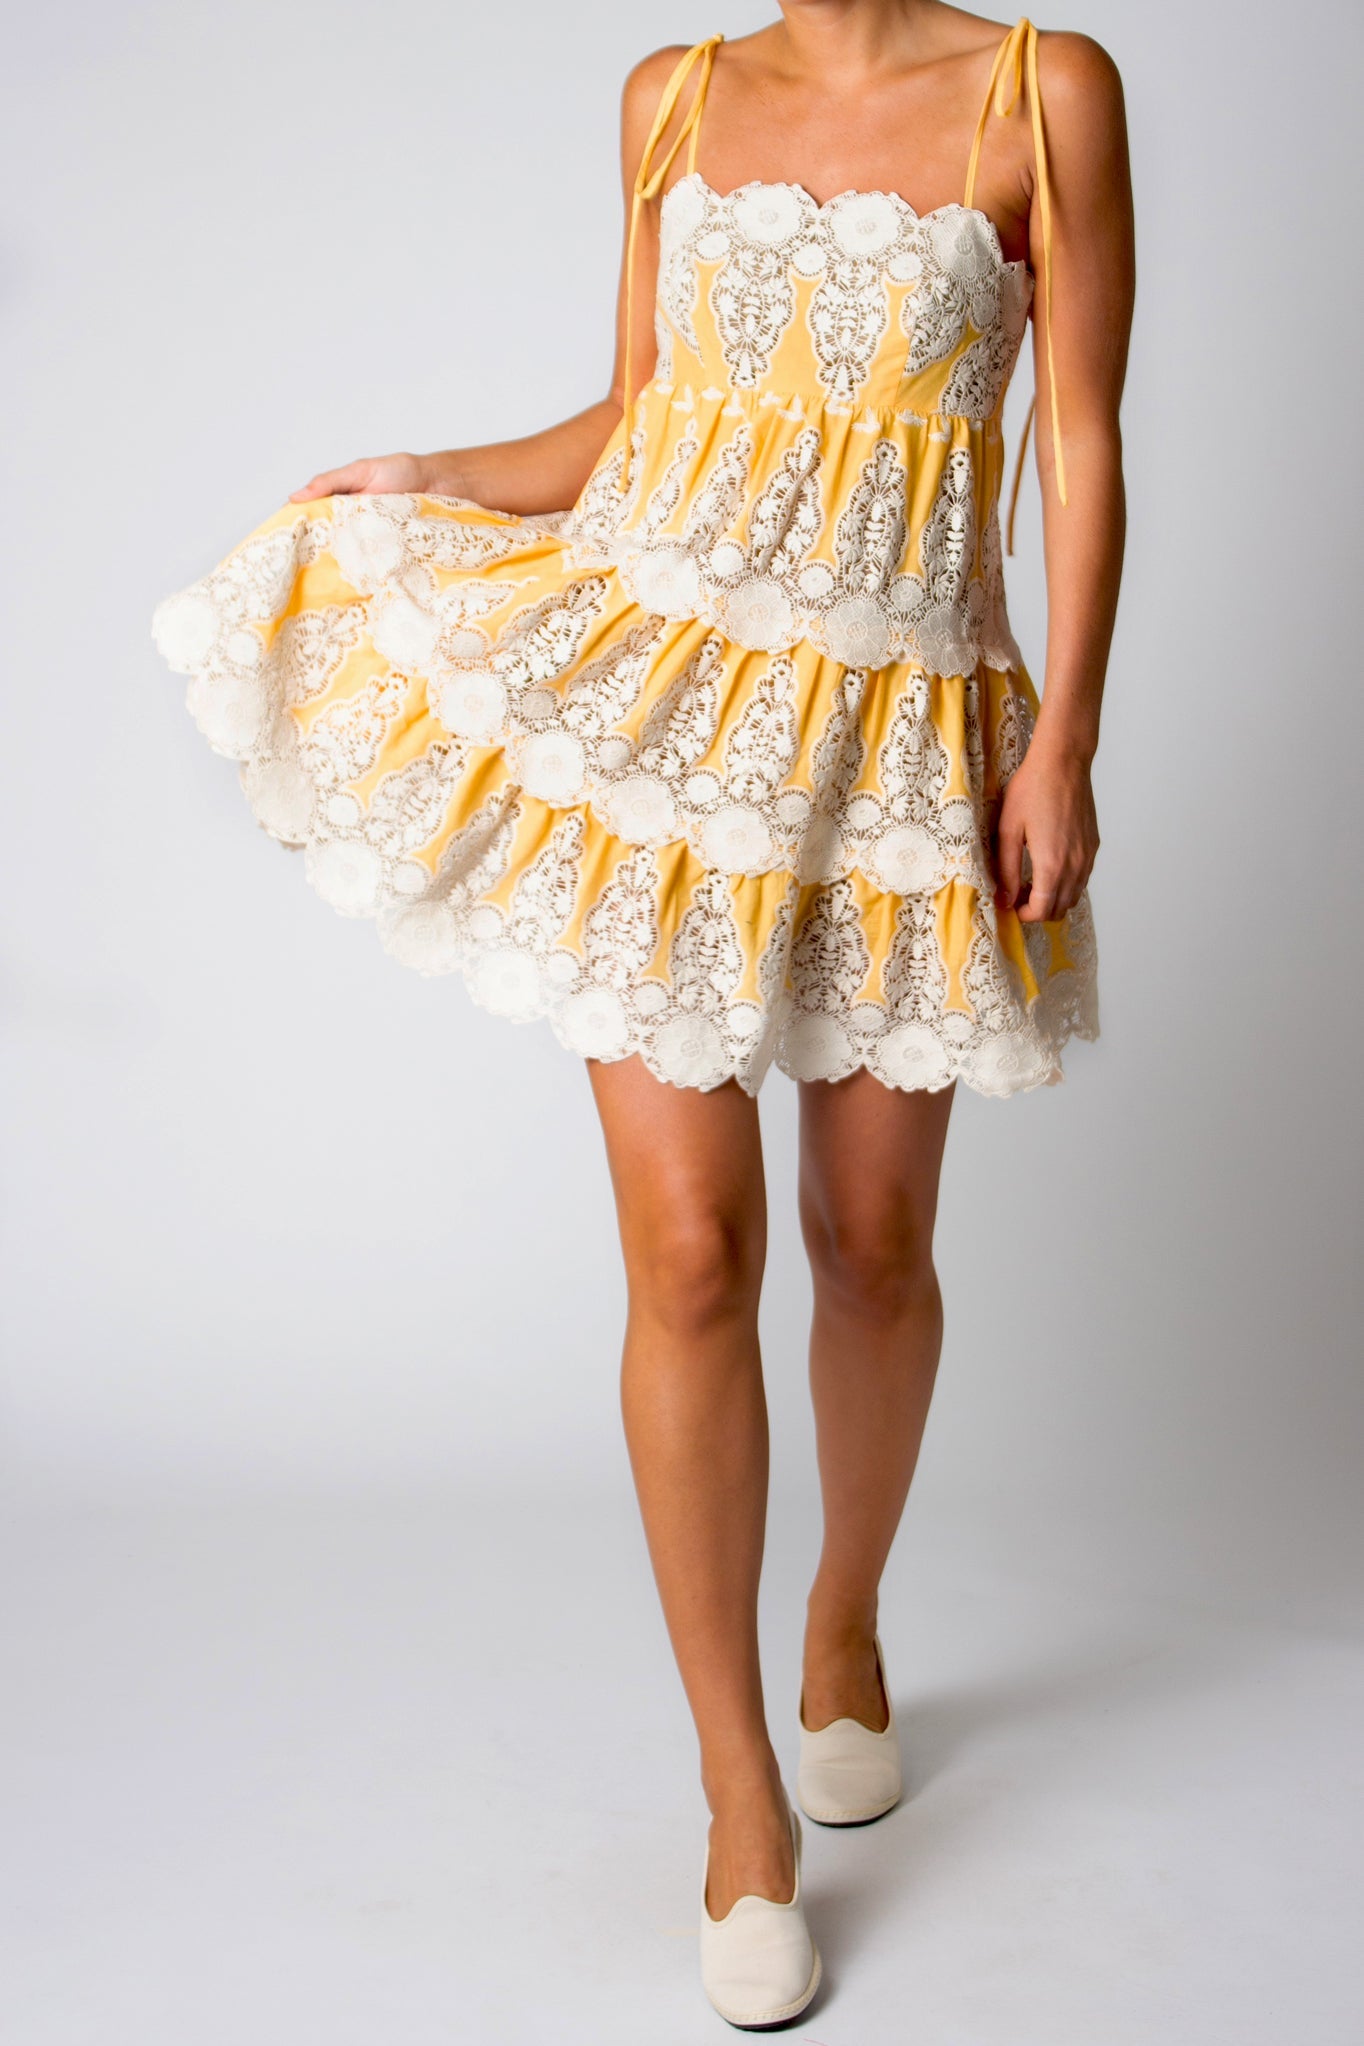 Gwendolyn Hummingbird Embroidered Dress by Miguelina